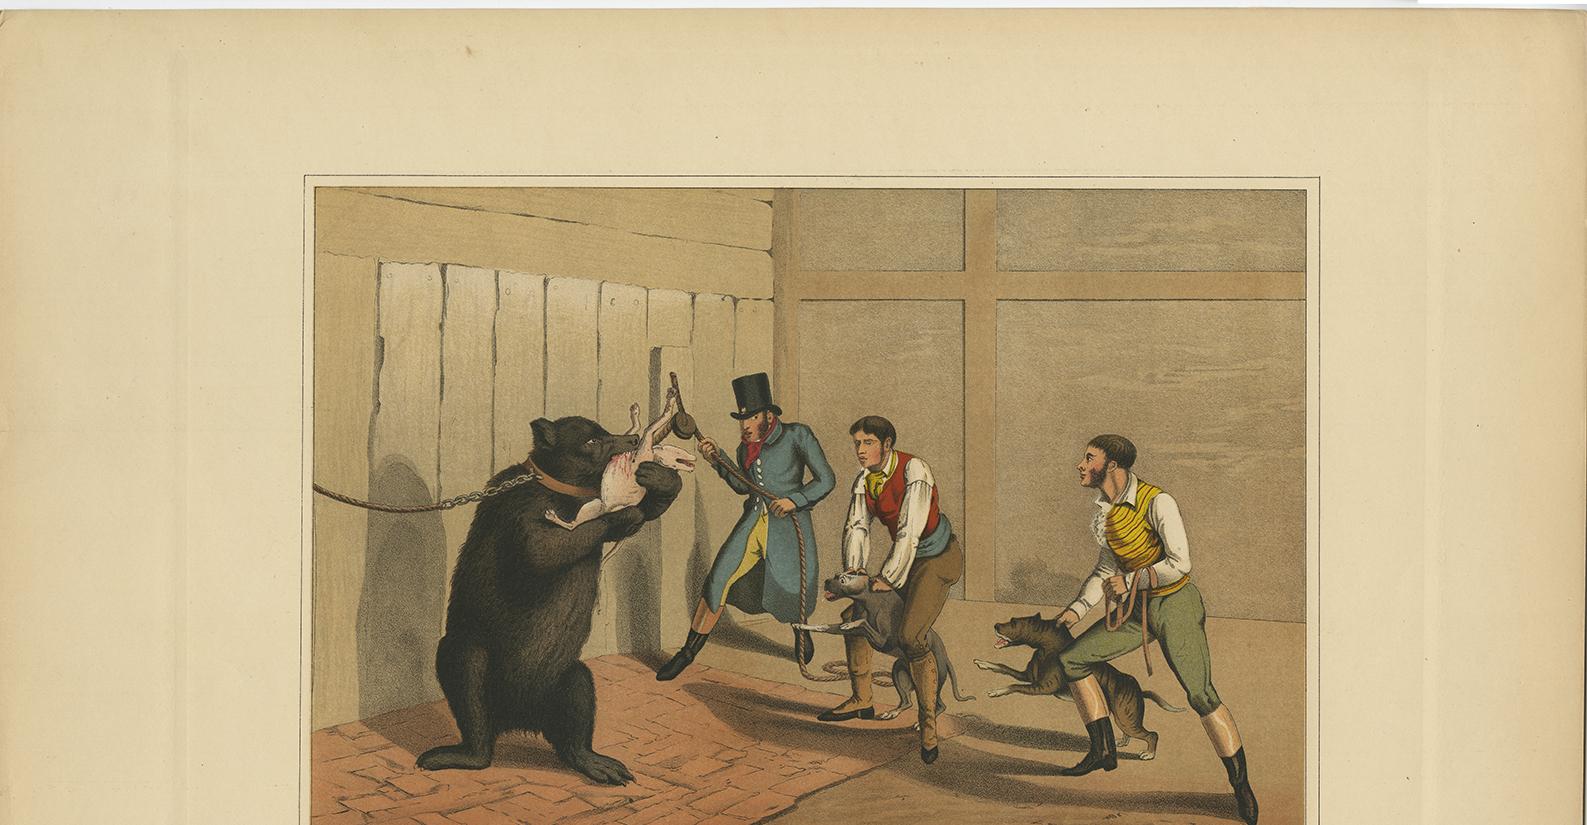 Handcolored aquatint made after Henry Alken by J. Clark. Published by T. McLean, London, 1820.

The antique aquatint titled 'Bear Baiting' by J. Clark portrays a scene related to the cruel and now outlawed practice of bear-baiting, a form of